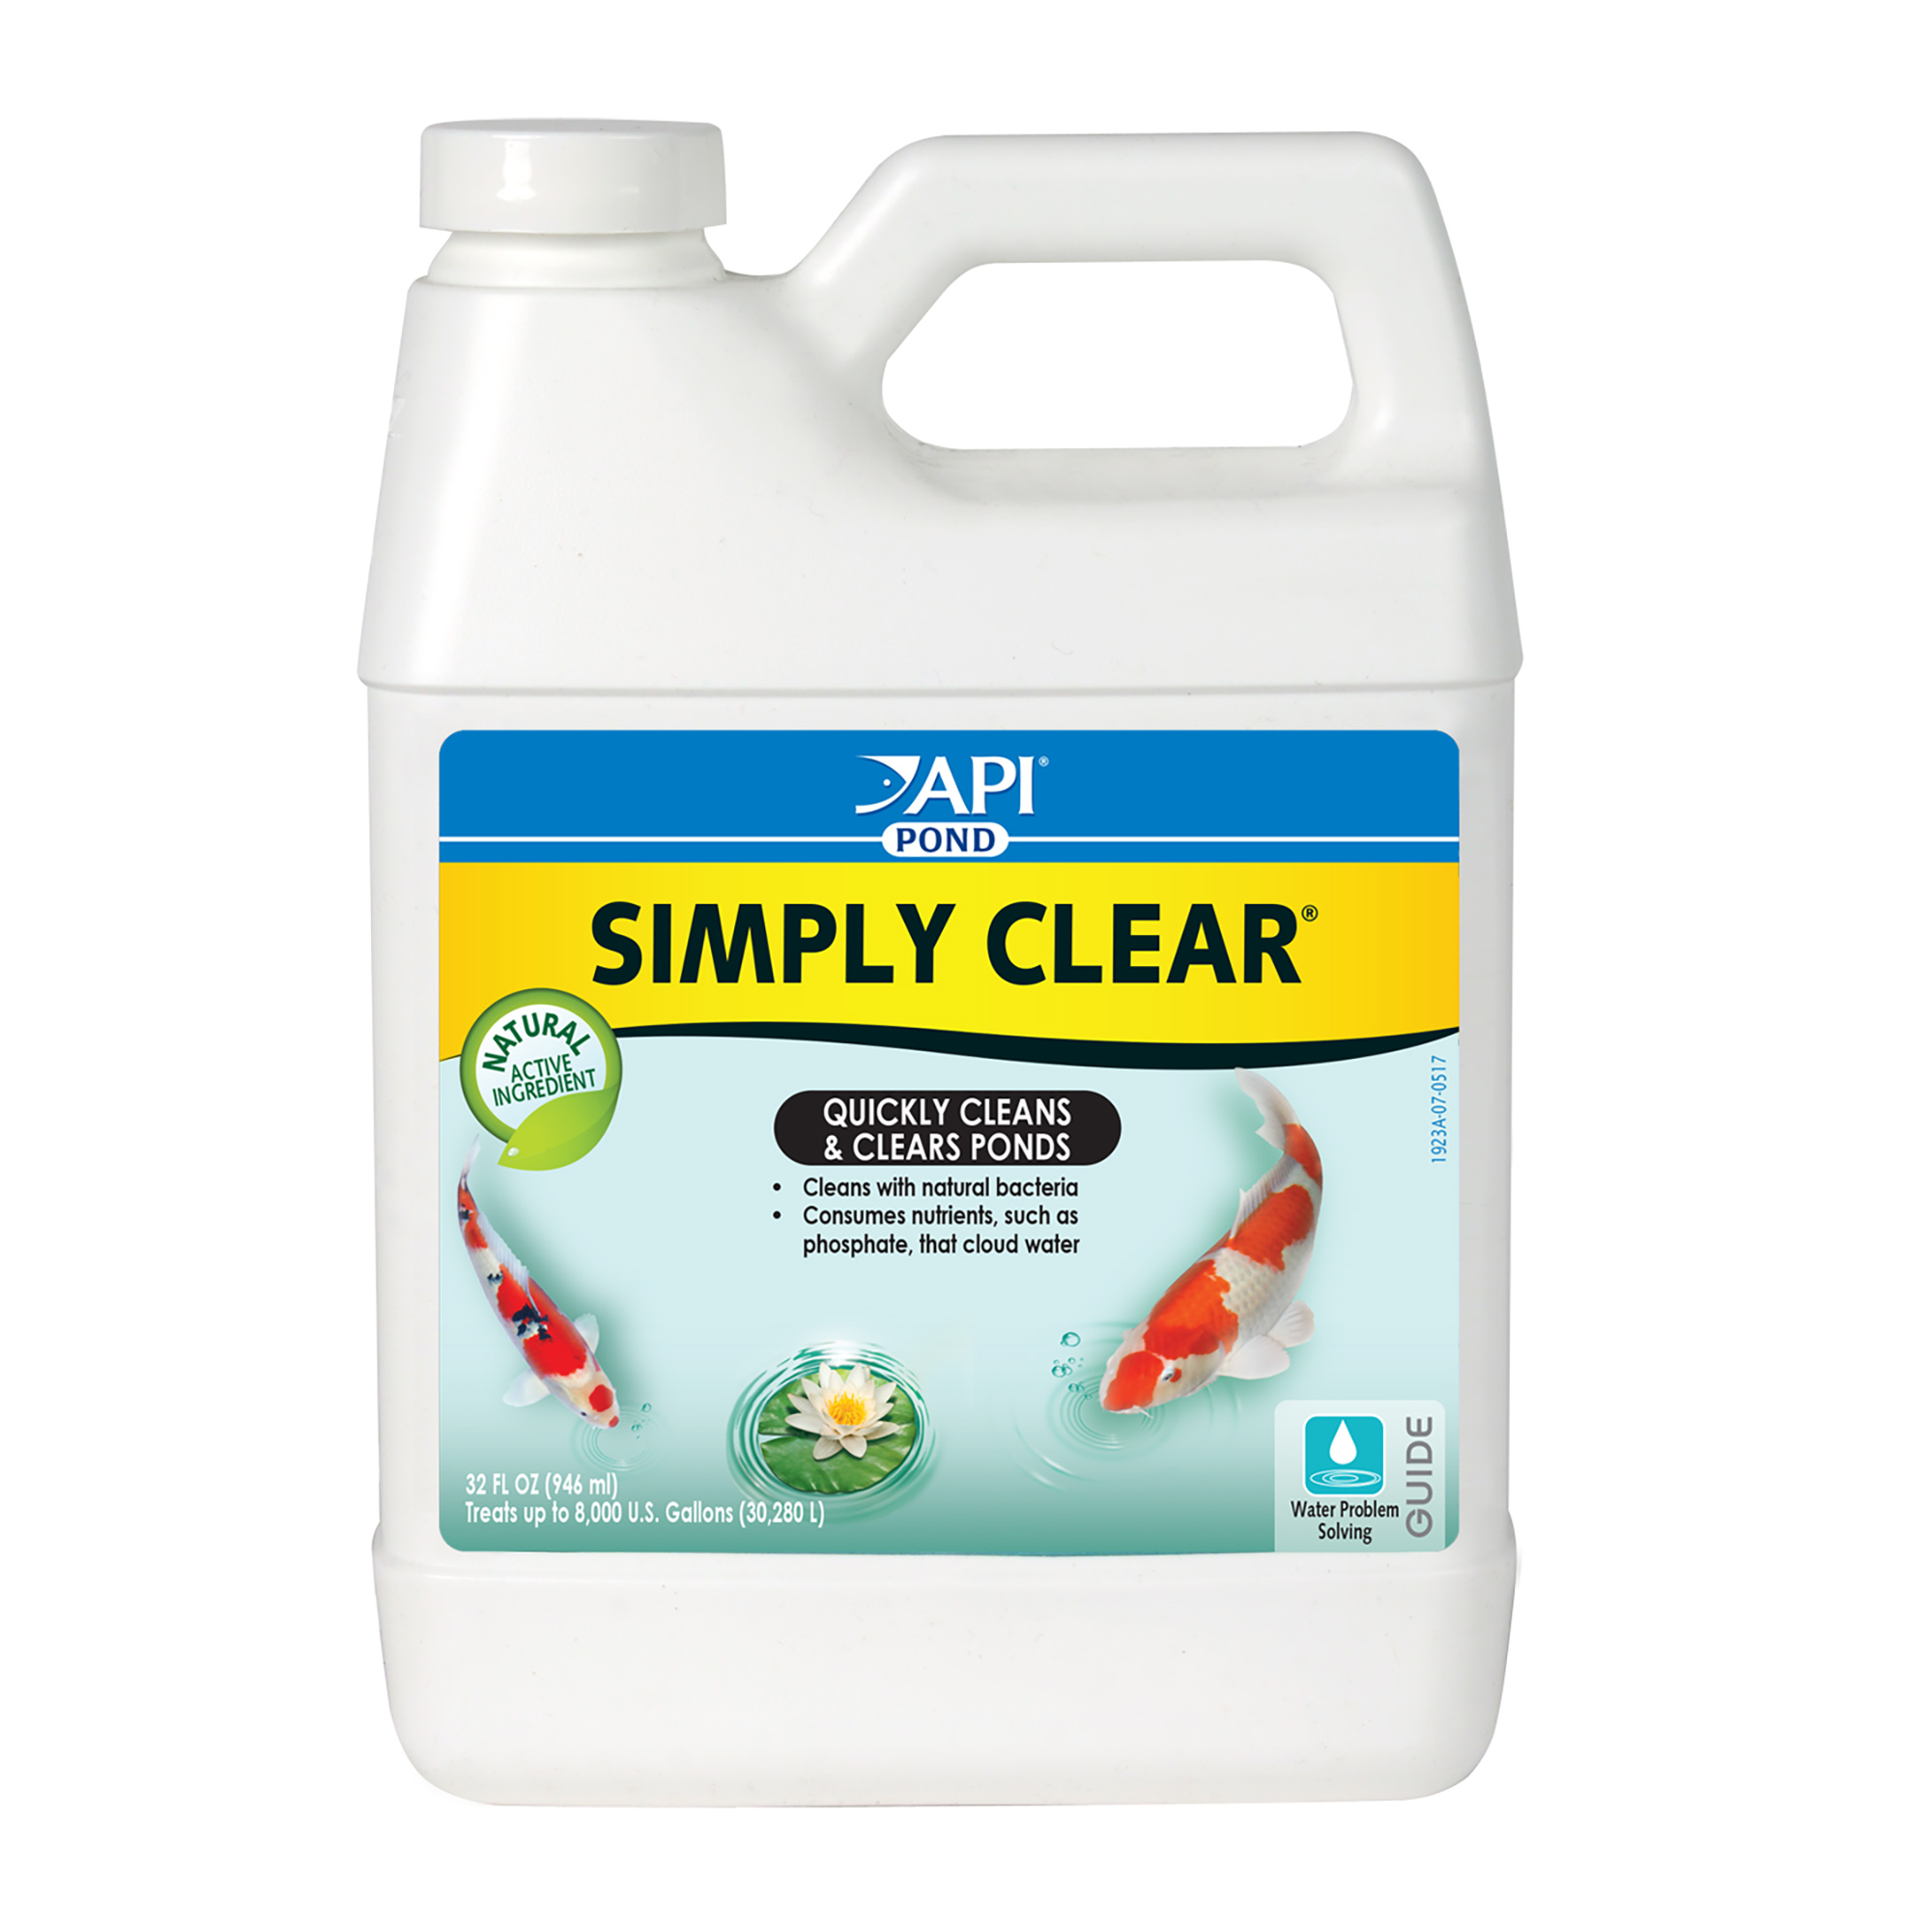 API Pond Simply Clear, Pond Water Clarifier, 32-Ounce - image 1 of 7